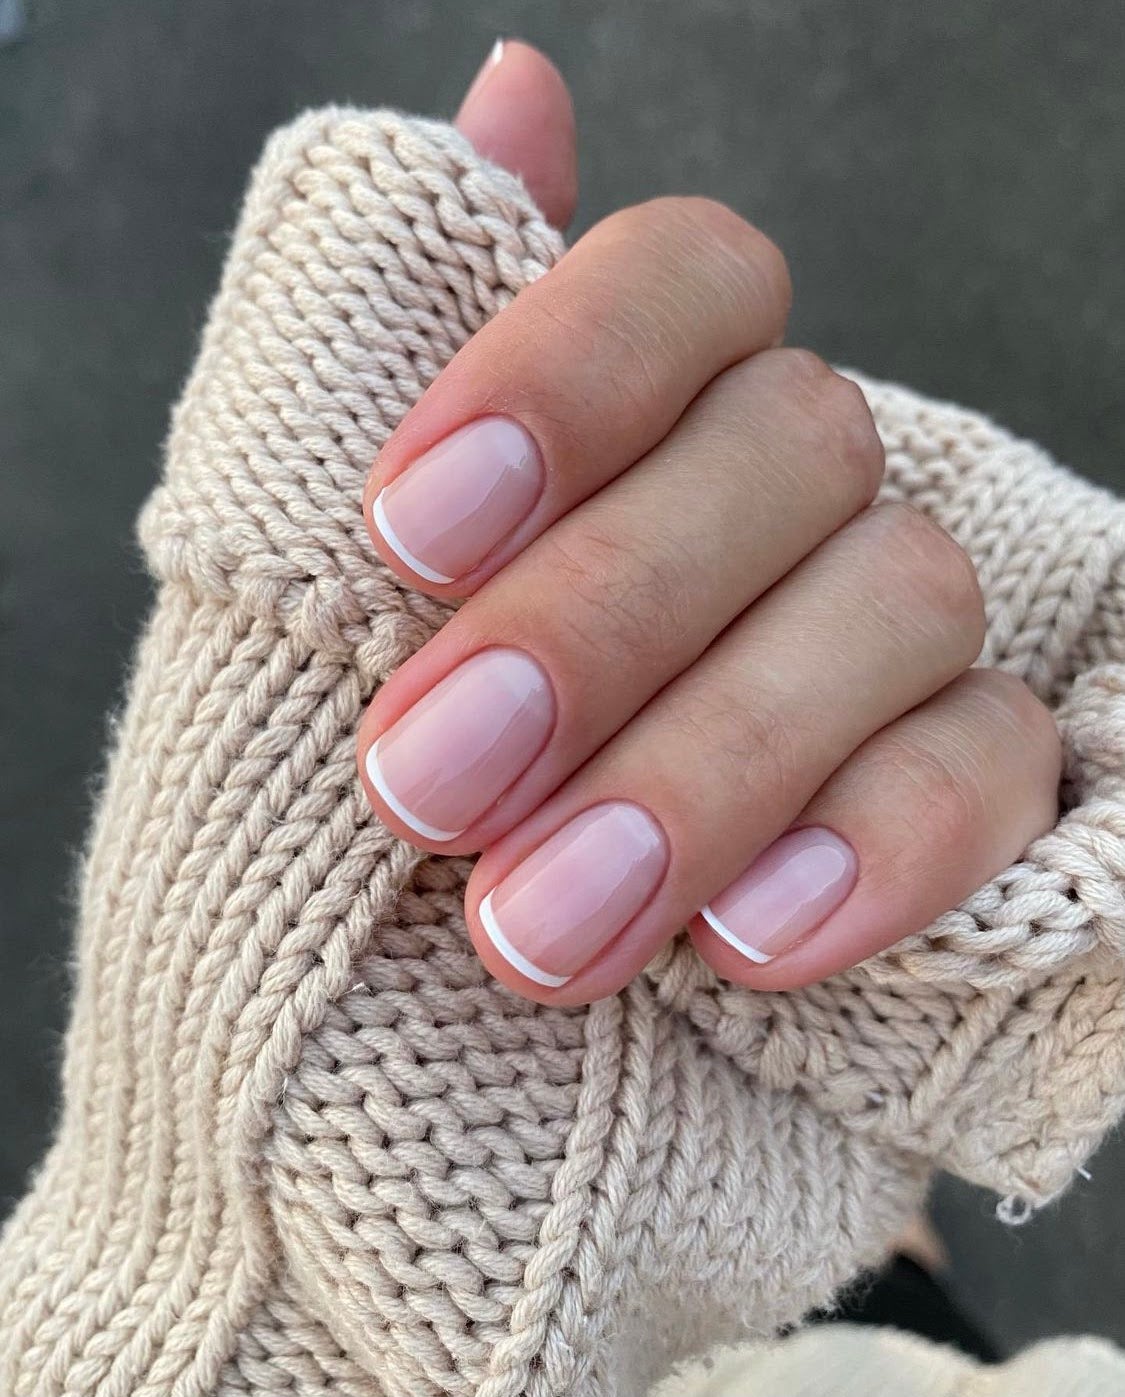 A Short French Manicure Is Easier with This TikTok Hack